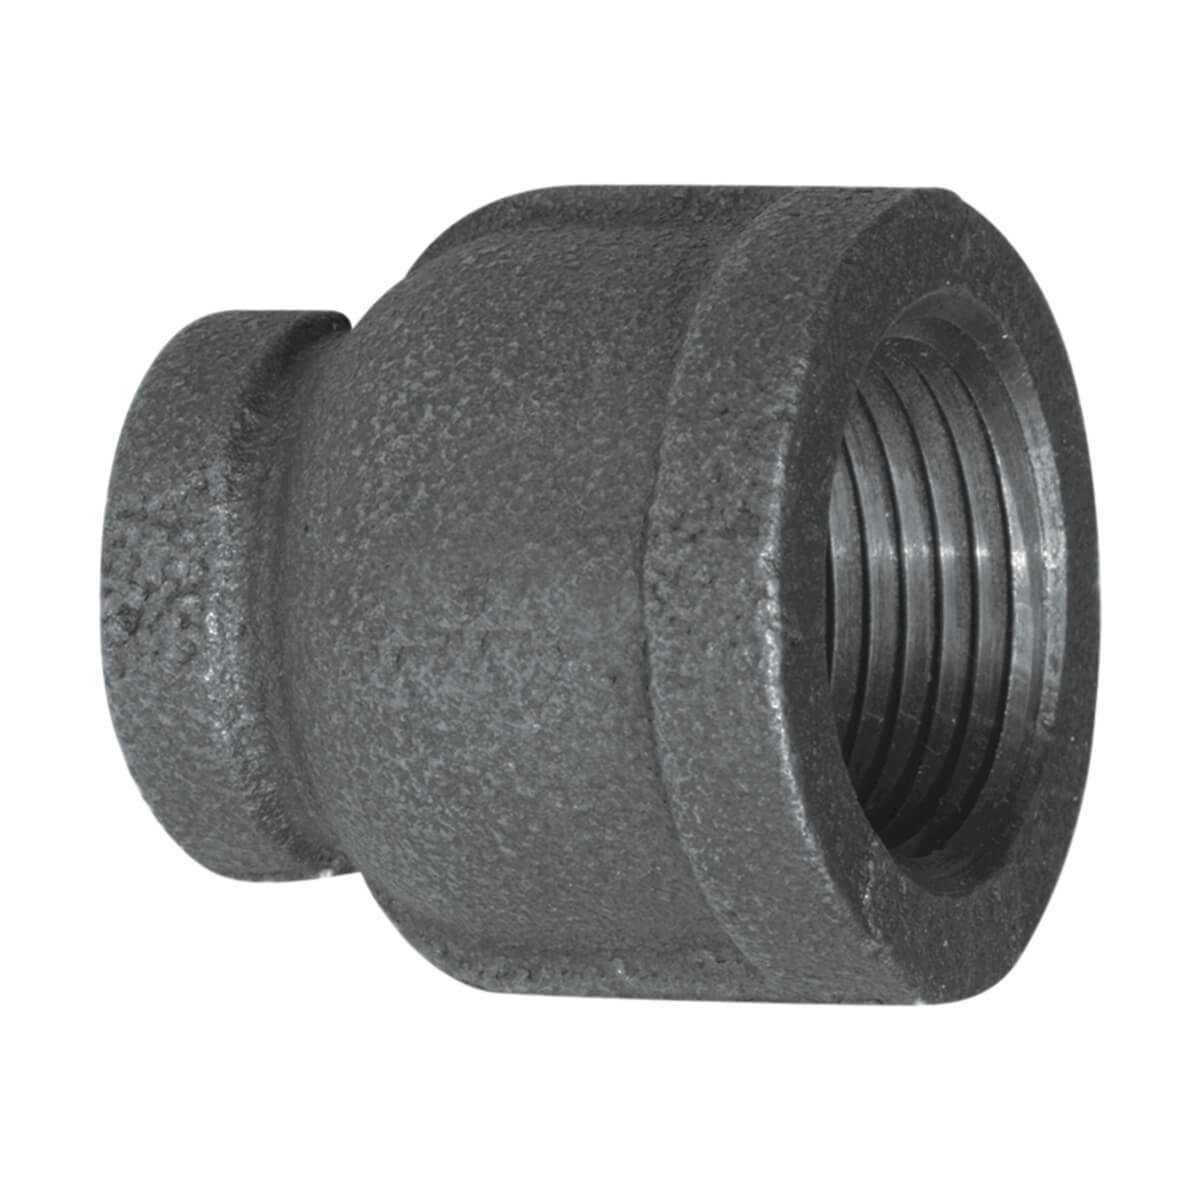 Fitting Black Iron Reducer Coupling - 3/4-in x 1/2-in